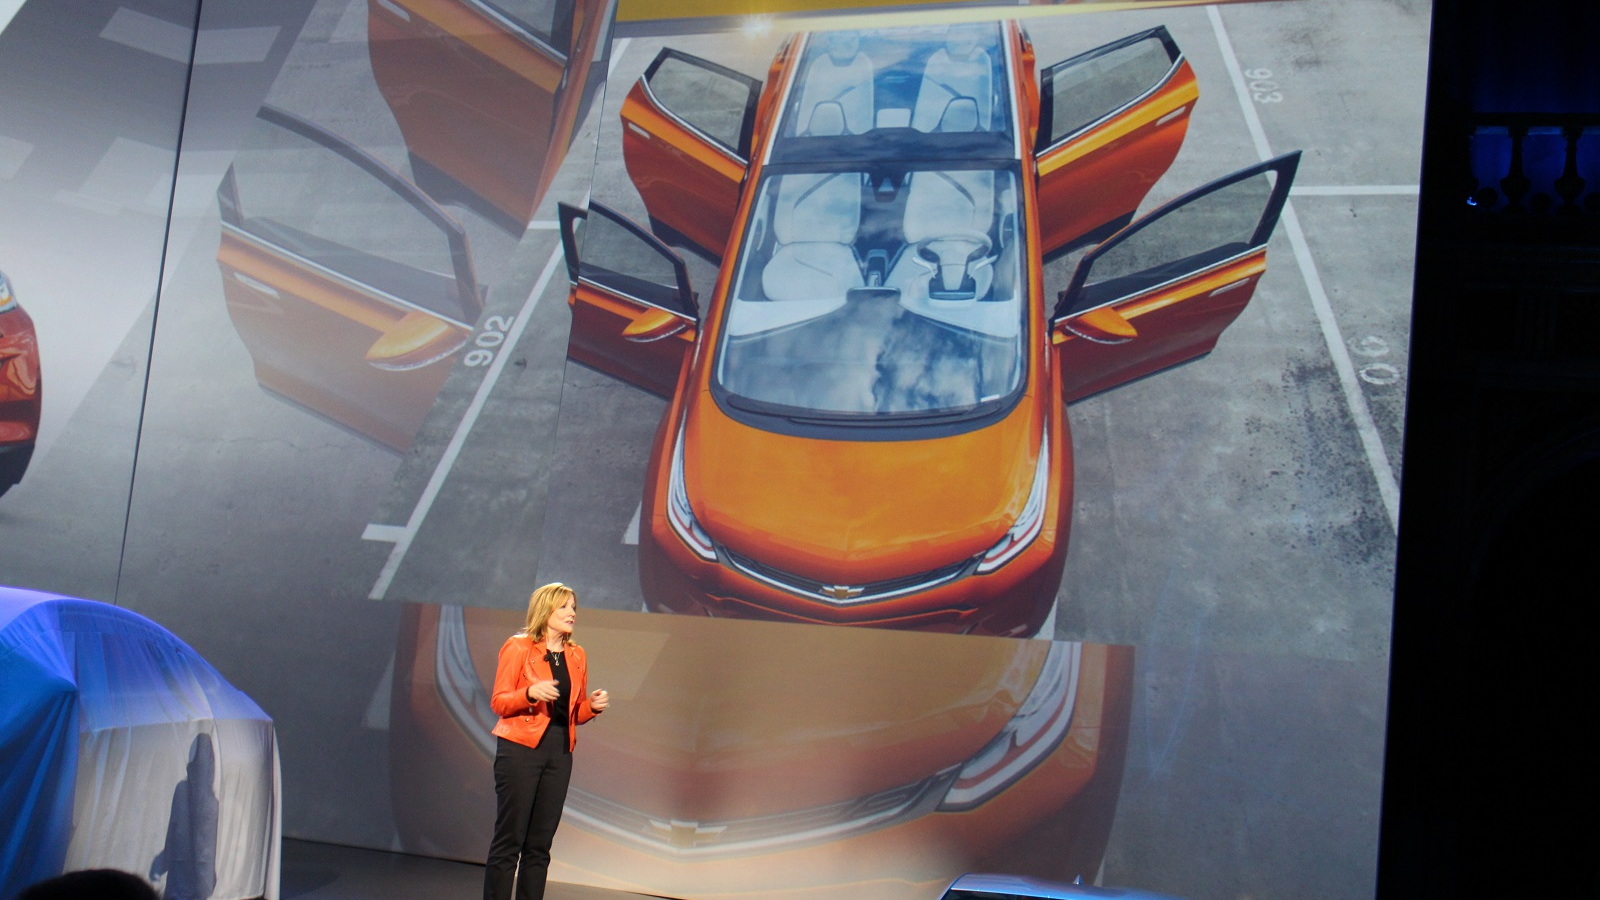 GM CEO Mary Barra and Chevy Bolt EV electric car image at 2016 Chevrolet Cruze launch, Jun 2015